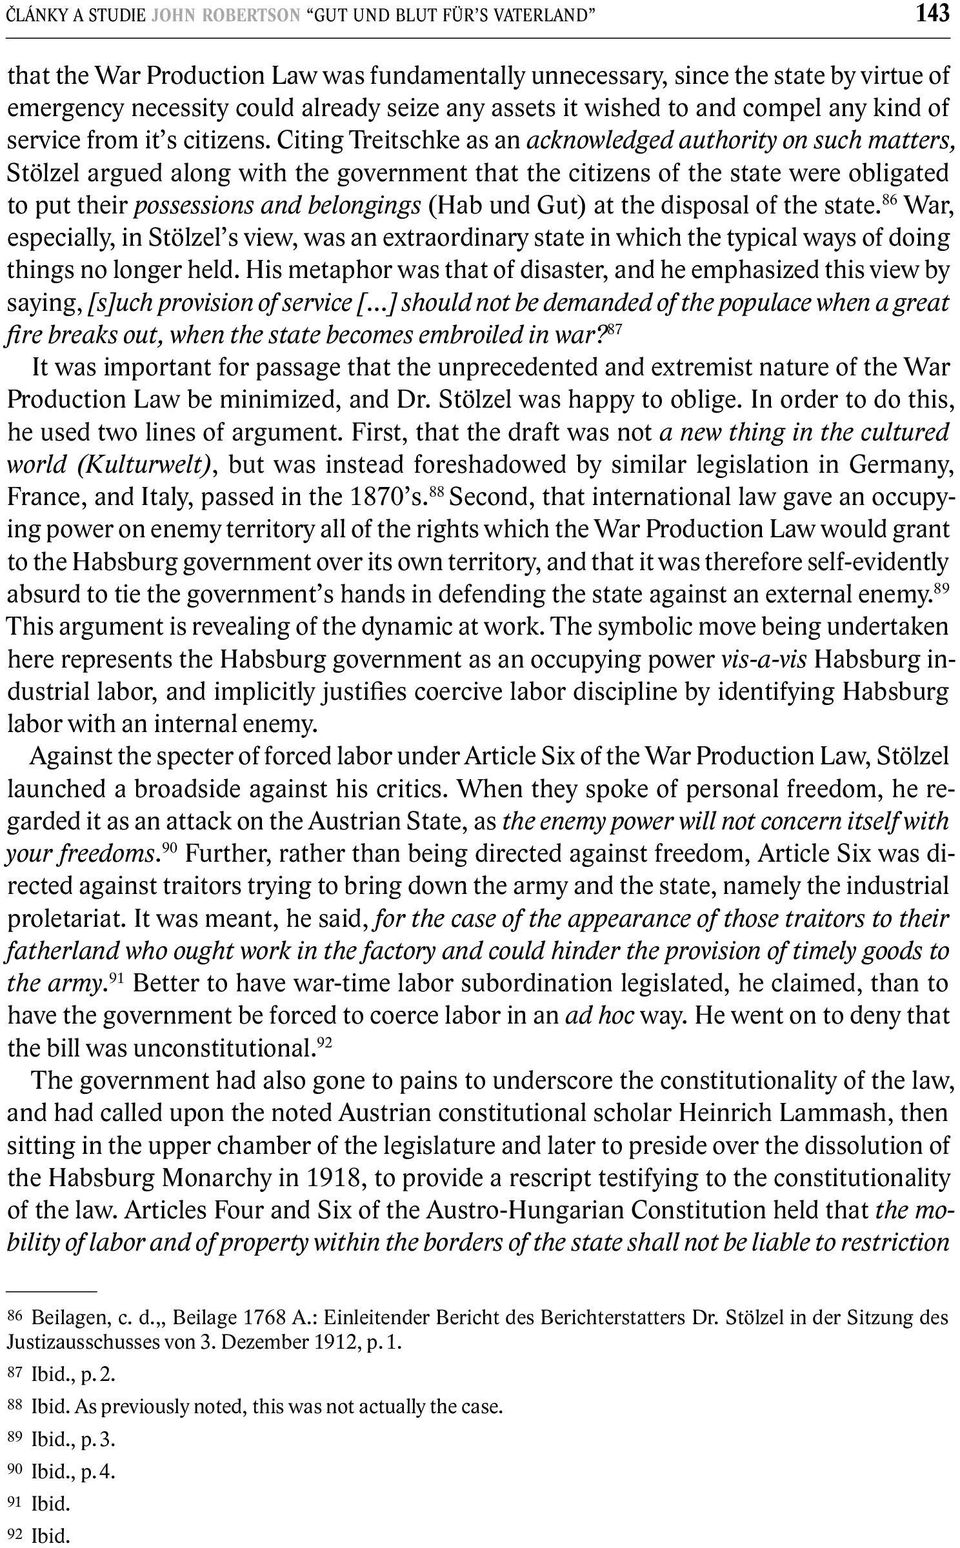 Citing Treitschke as an acknowledged authority on such matters, Stölzel argued along with the government that the citizens of the state were obligated to put their possessions and belongings (Hab und